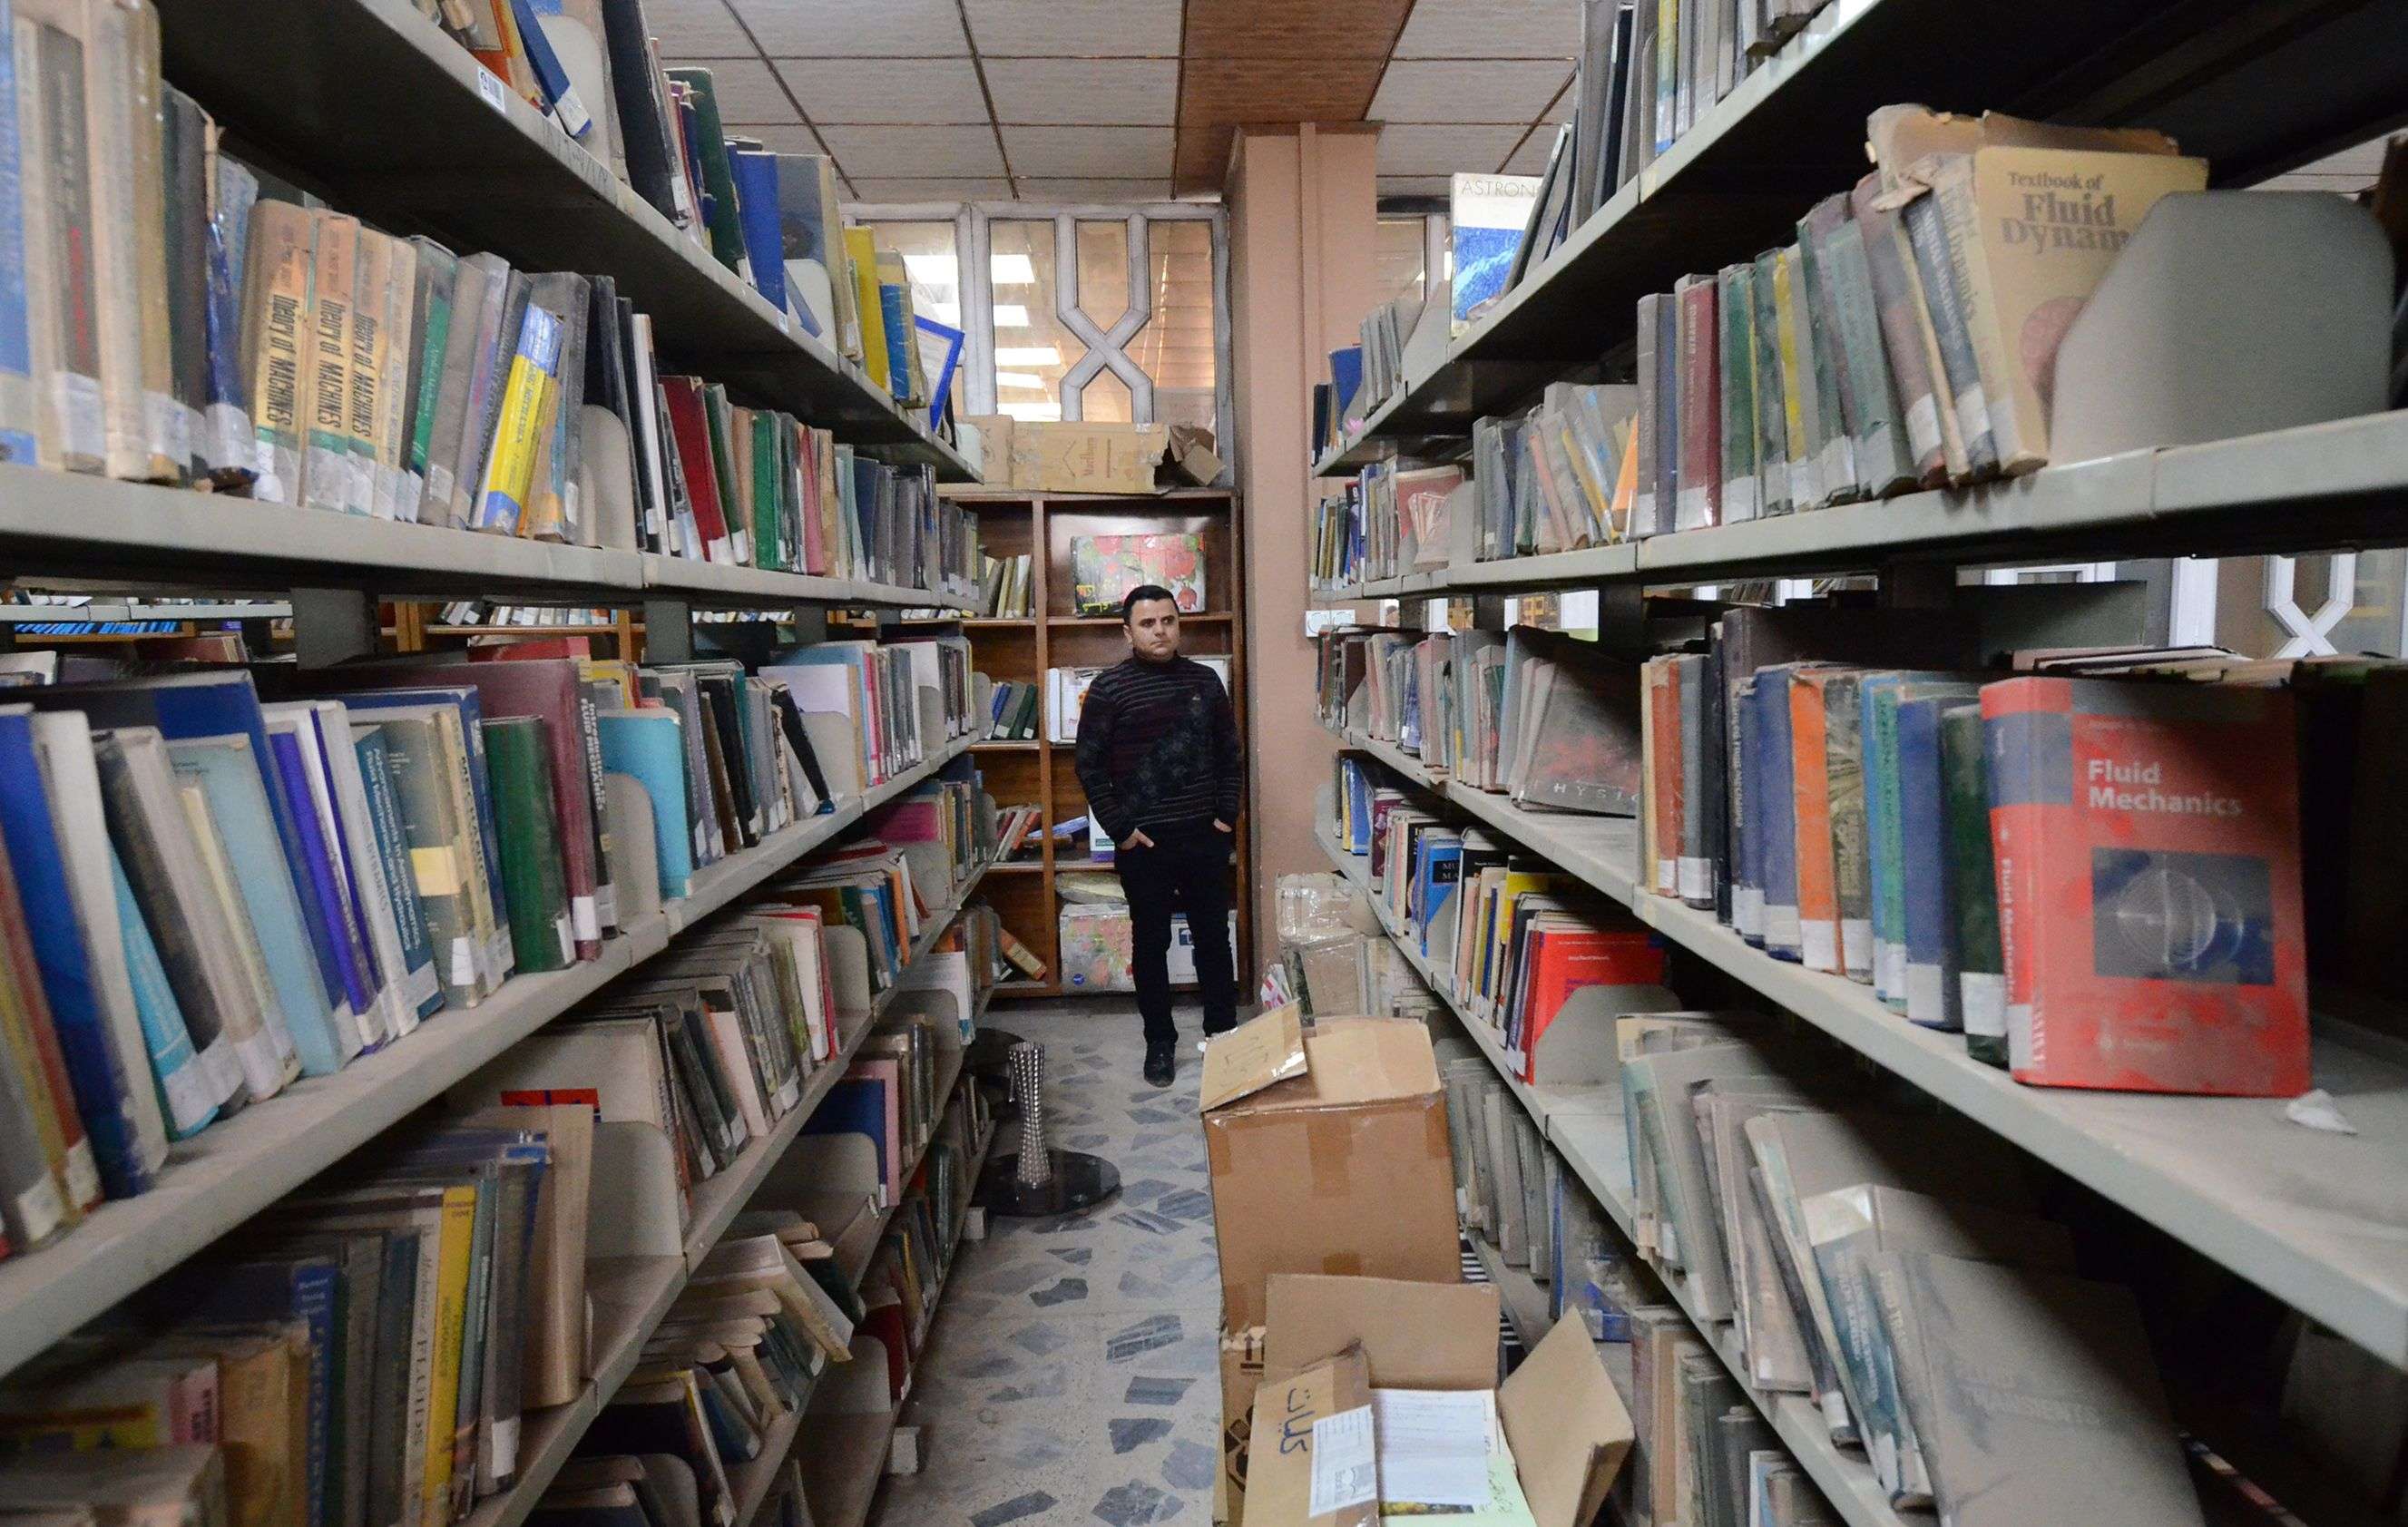 Although Mosul has been back in government hands since 2017, its young academics see the barren bookshelves as part of IS's dark legacy